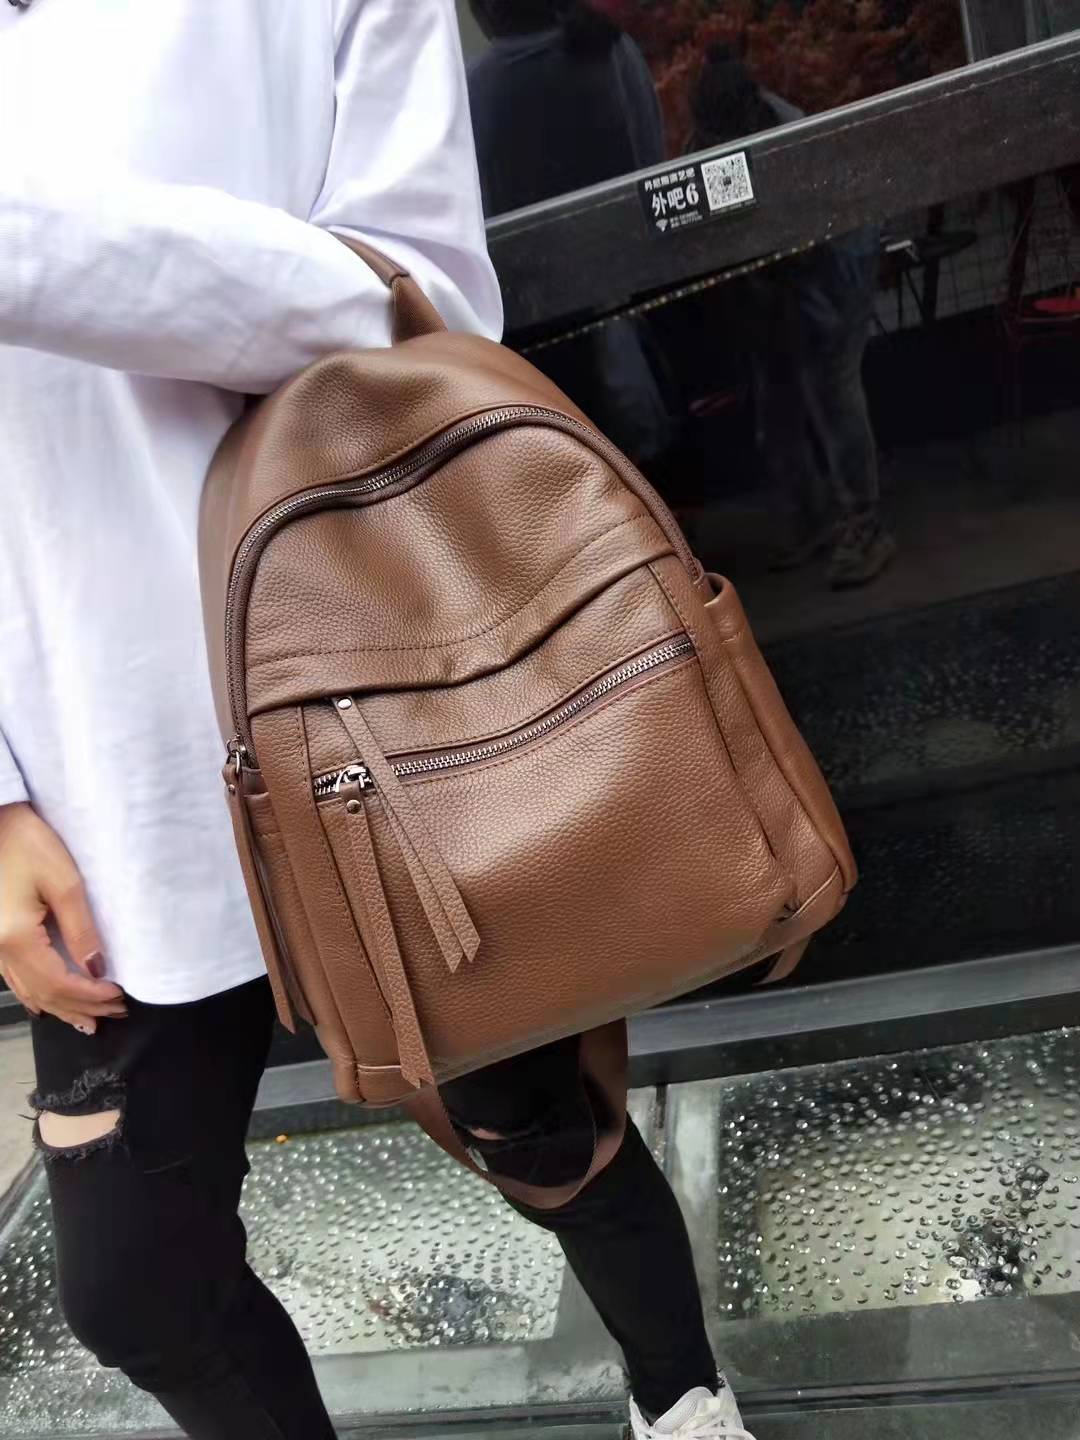 Caramel Real Genuine Leather Backpack Women Simple Fashion